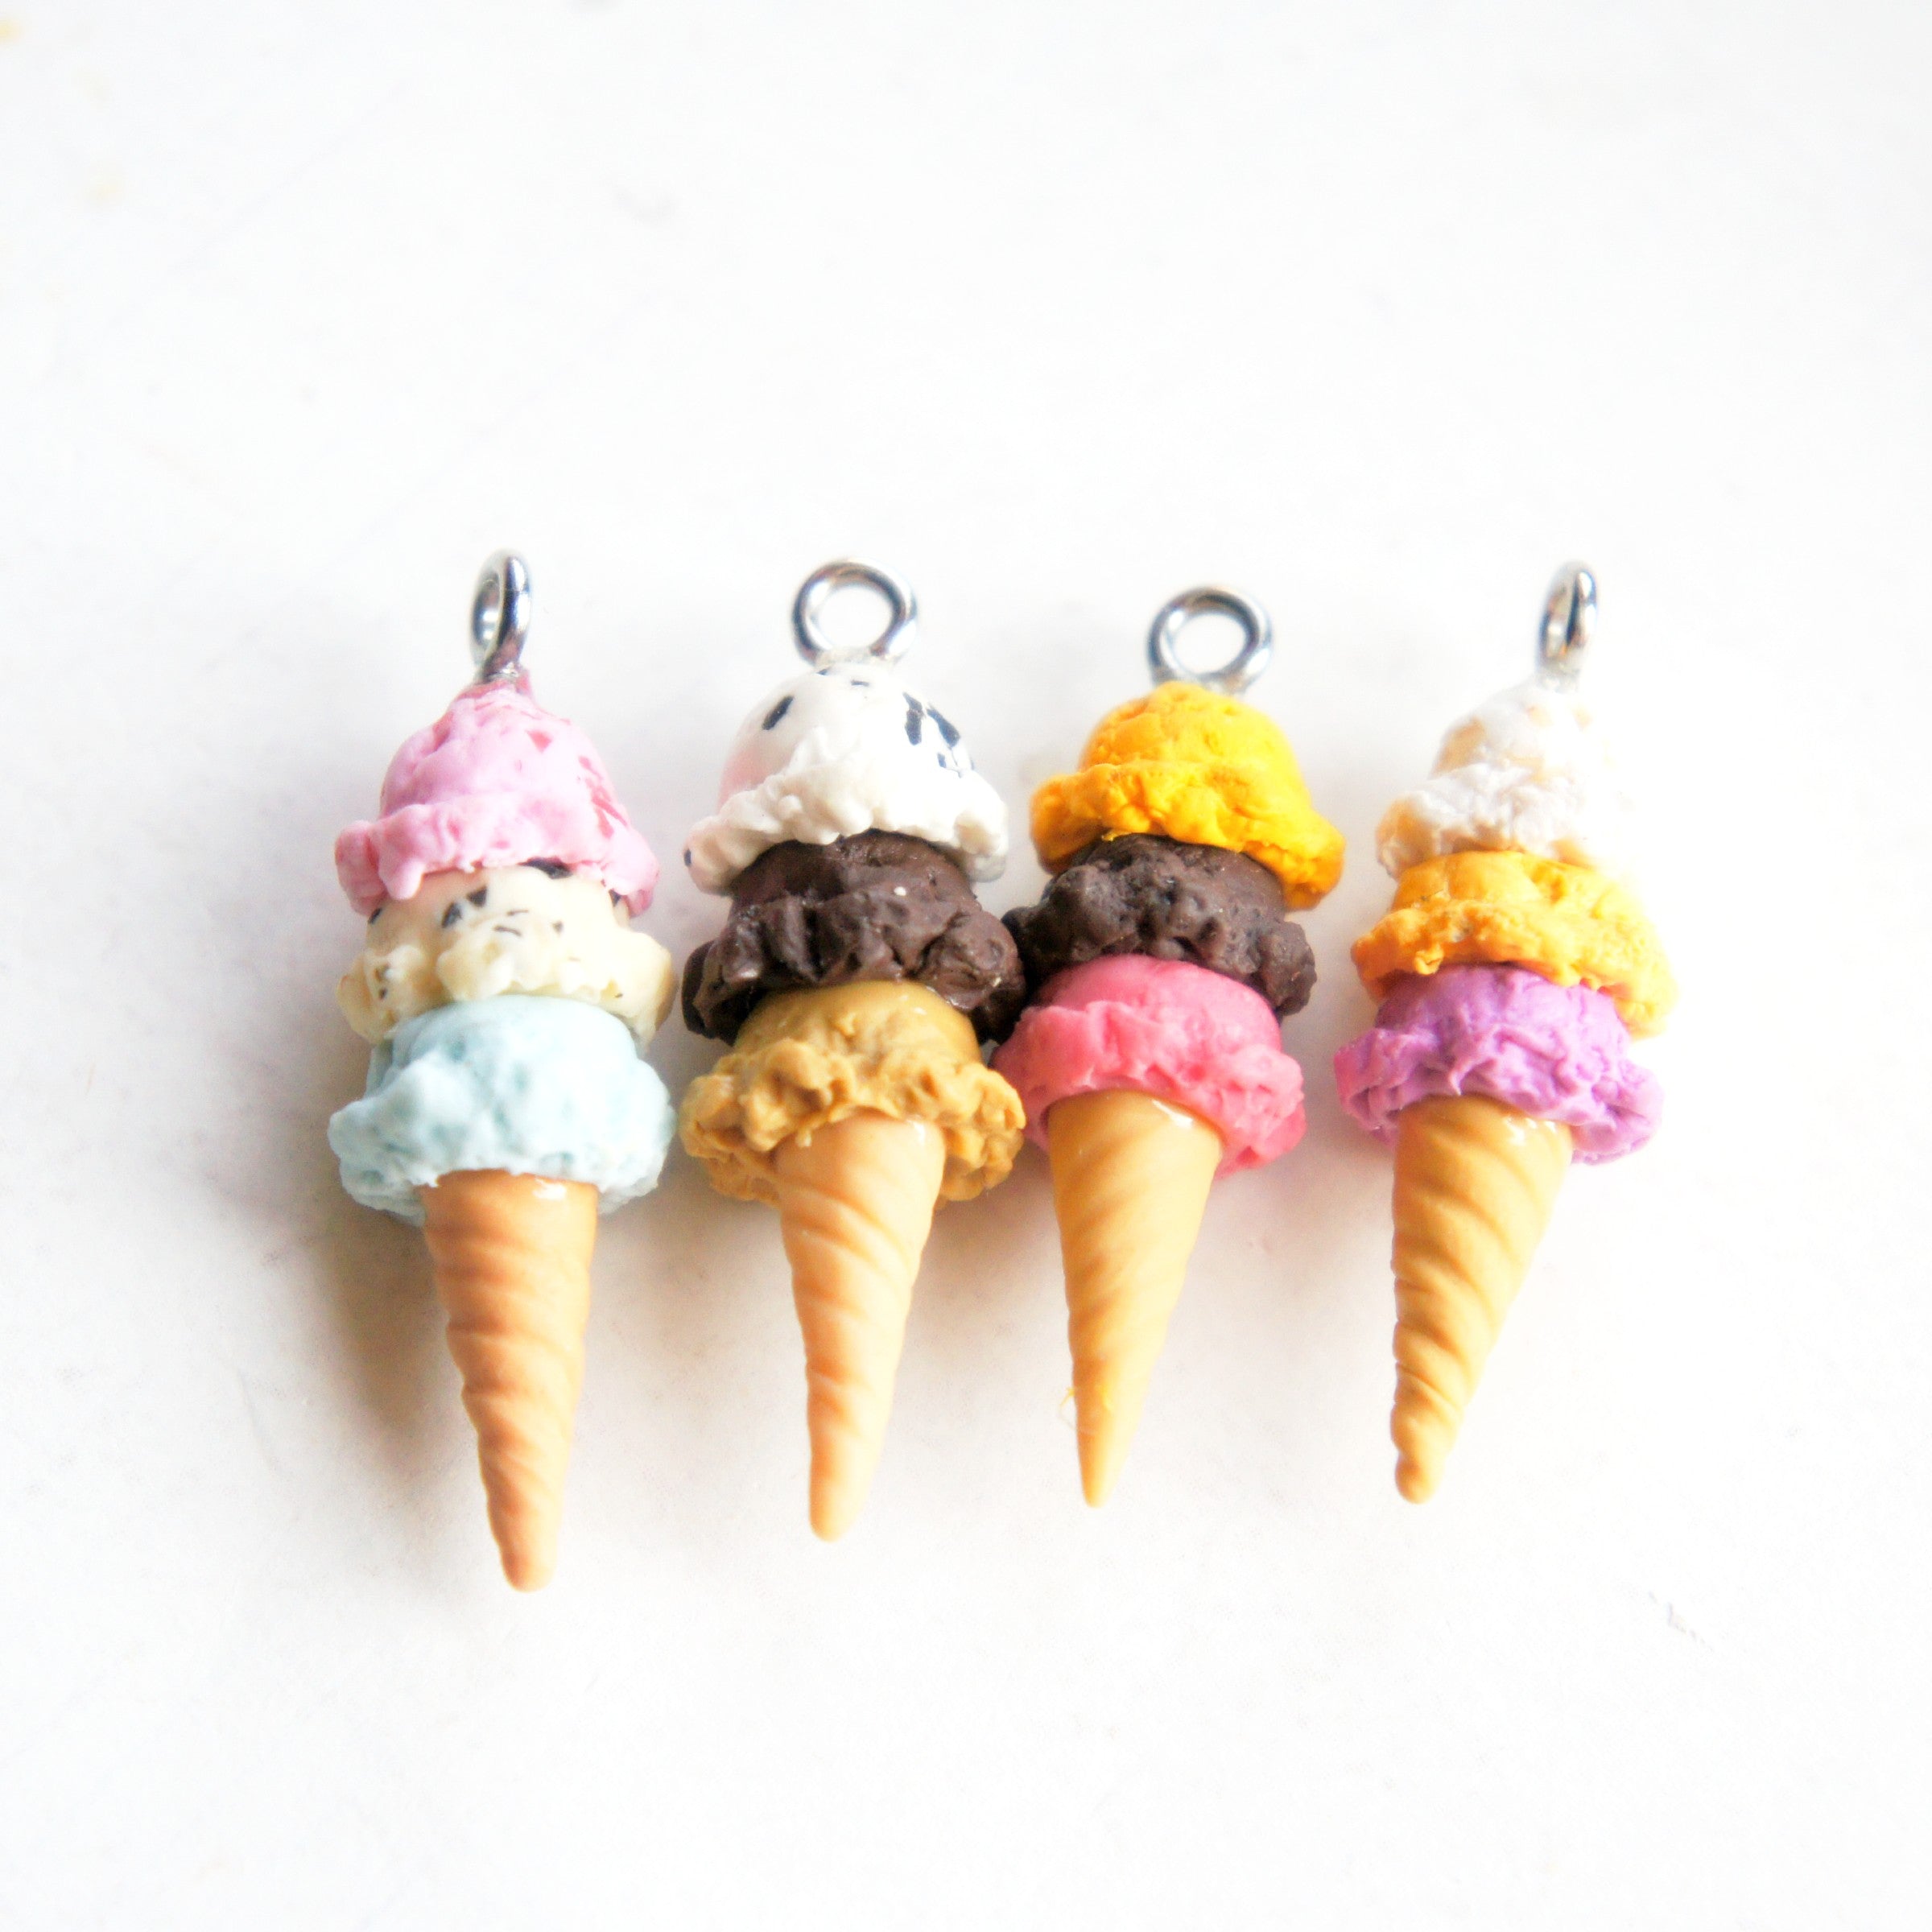 Triple Scoop Ice Cream Necklace - Jillicious charms and accessories